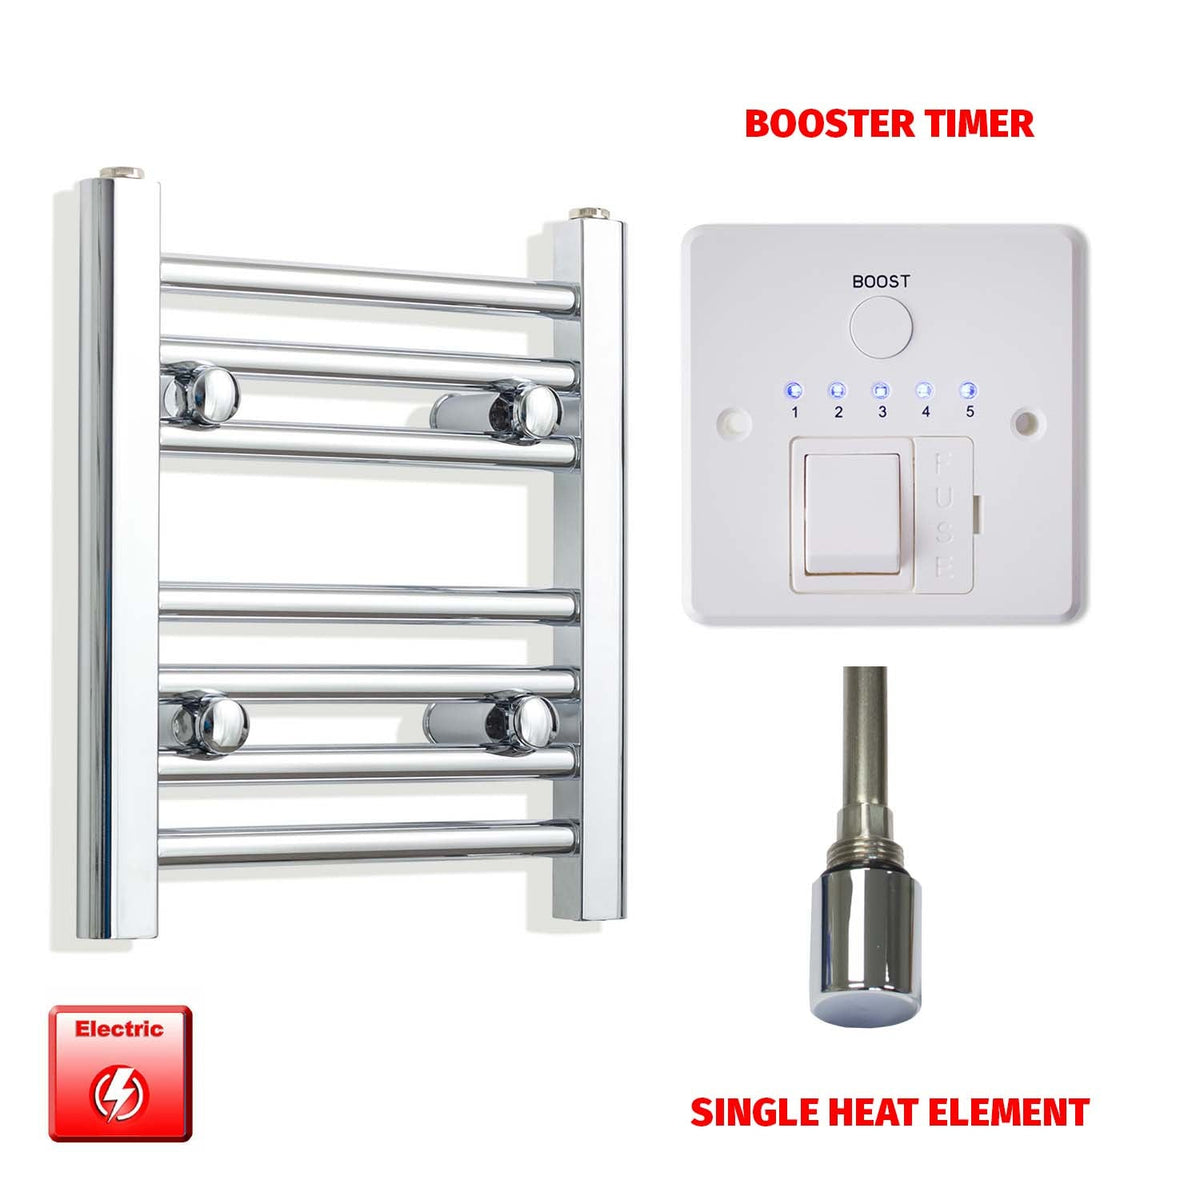 400mm High 350mm Wid Pre-Filled Electric Heated Towel Rail Radiator Straight Chrome Single heat element Booster timer